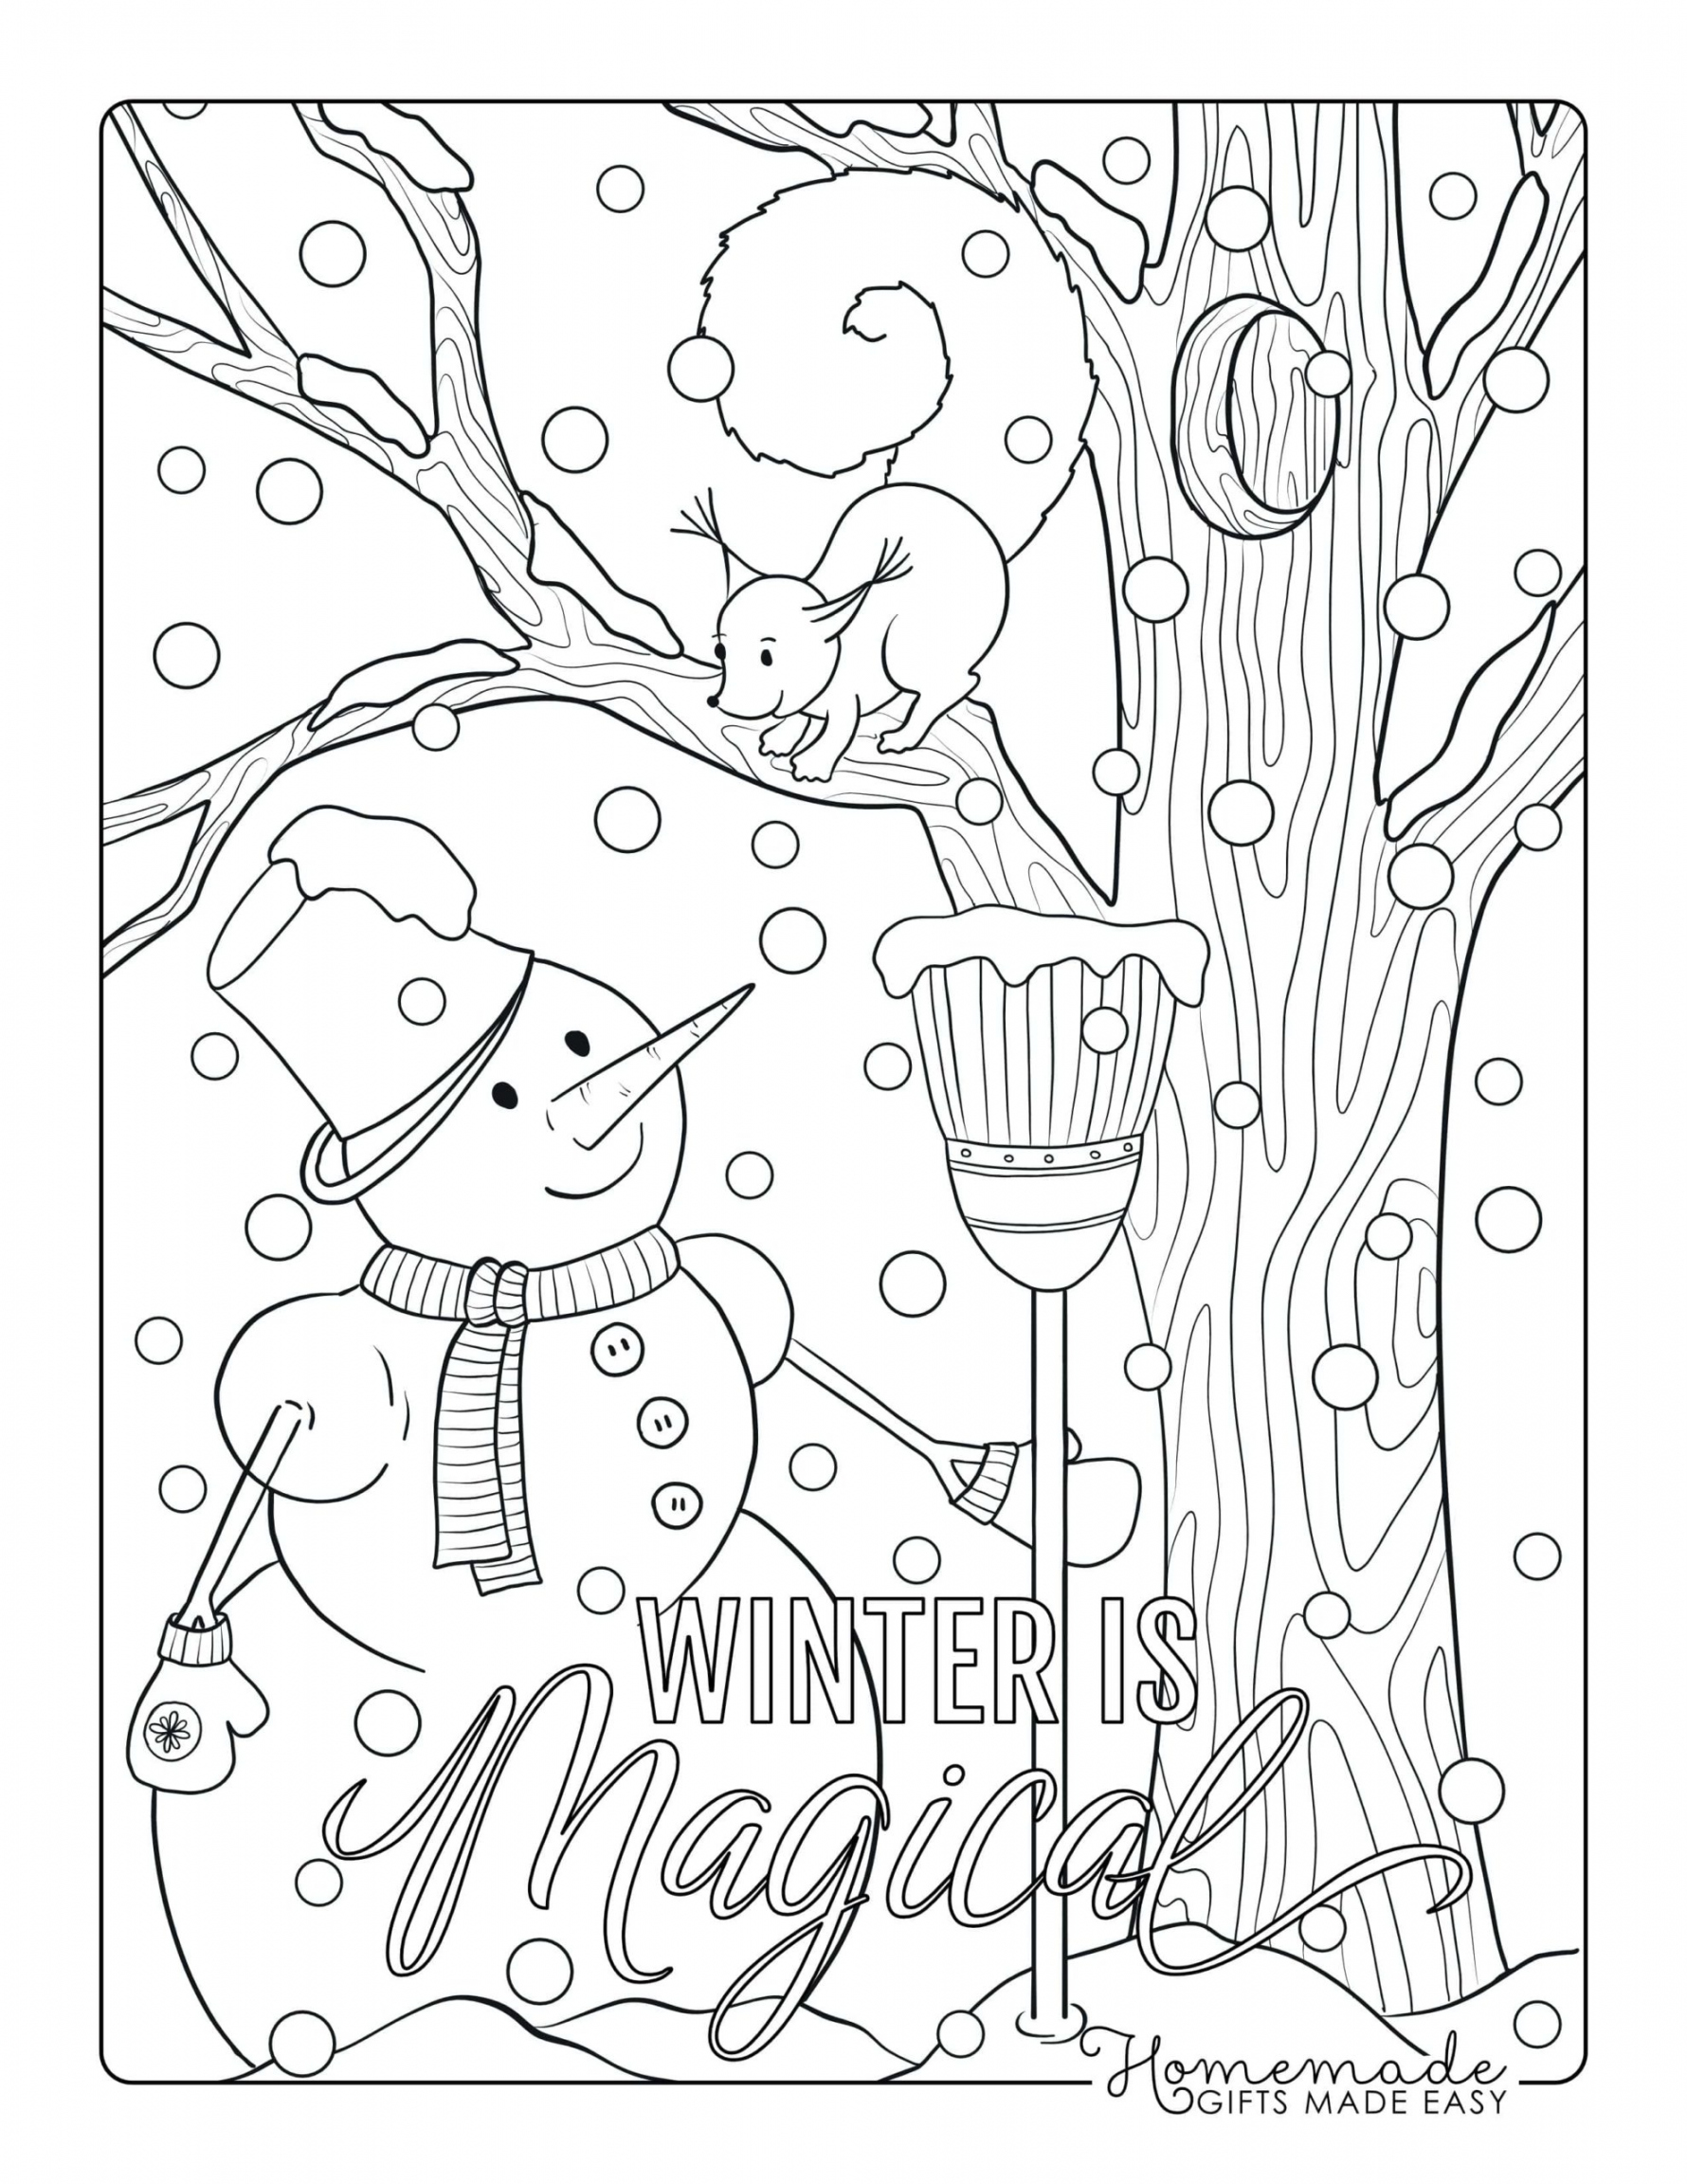 Free Winter Coloring Pages for Adults - Happier Human - FREE Printables - Free Printable Winter Coloring Pages